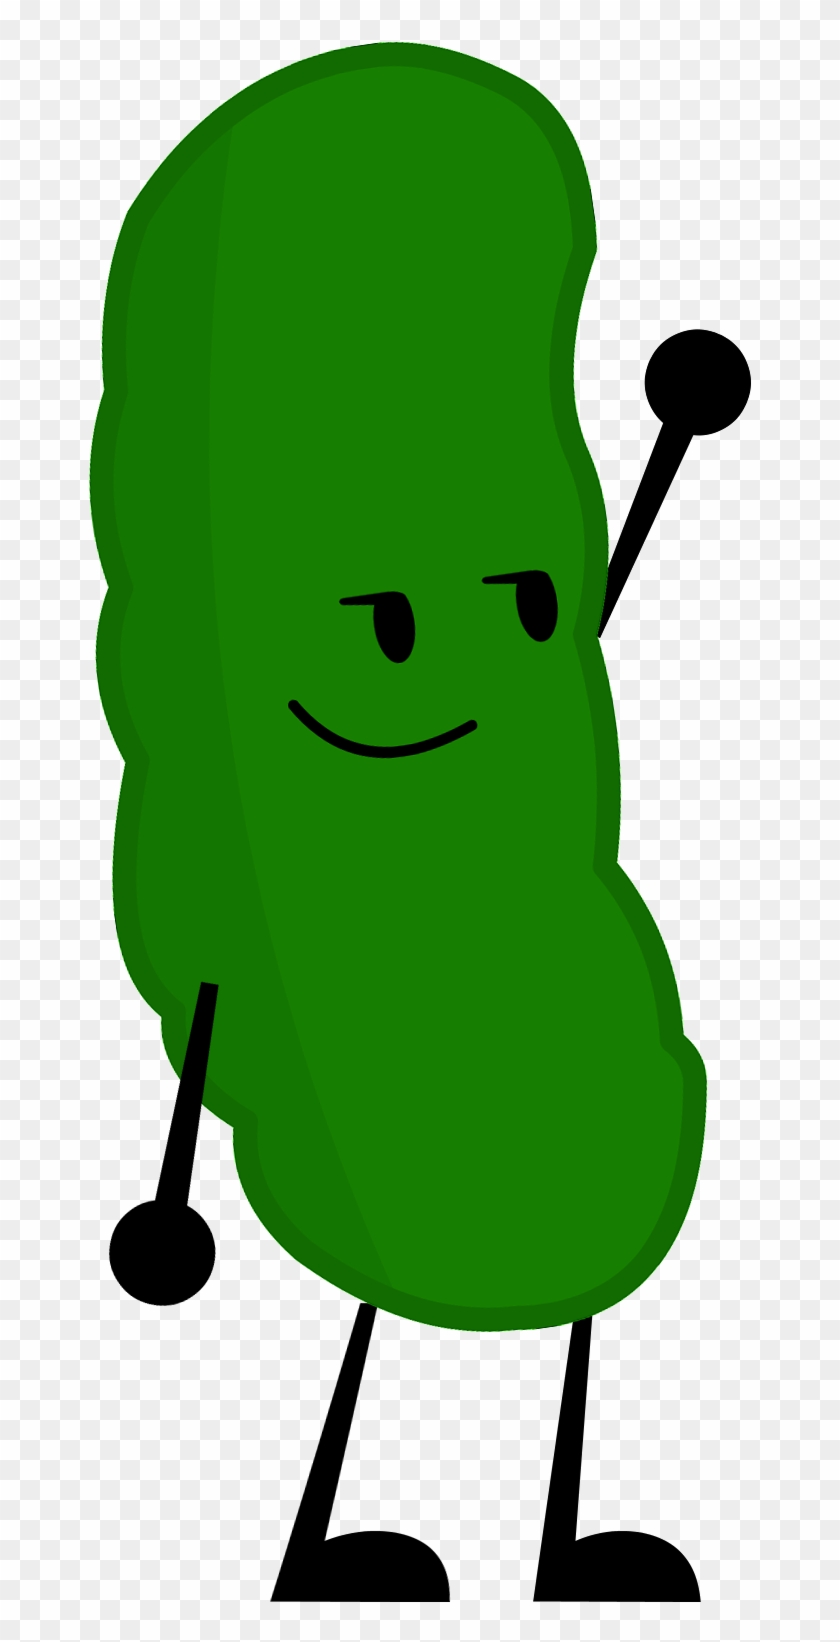 Image Picklepose Png Wiki Fandom Powered By - Pickle With Arms And Legs Clipart